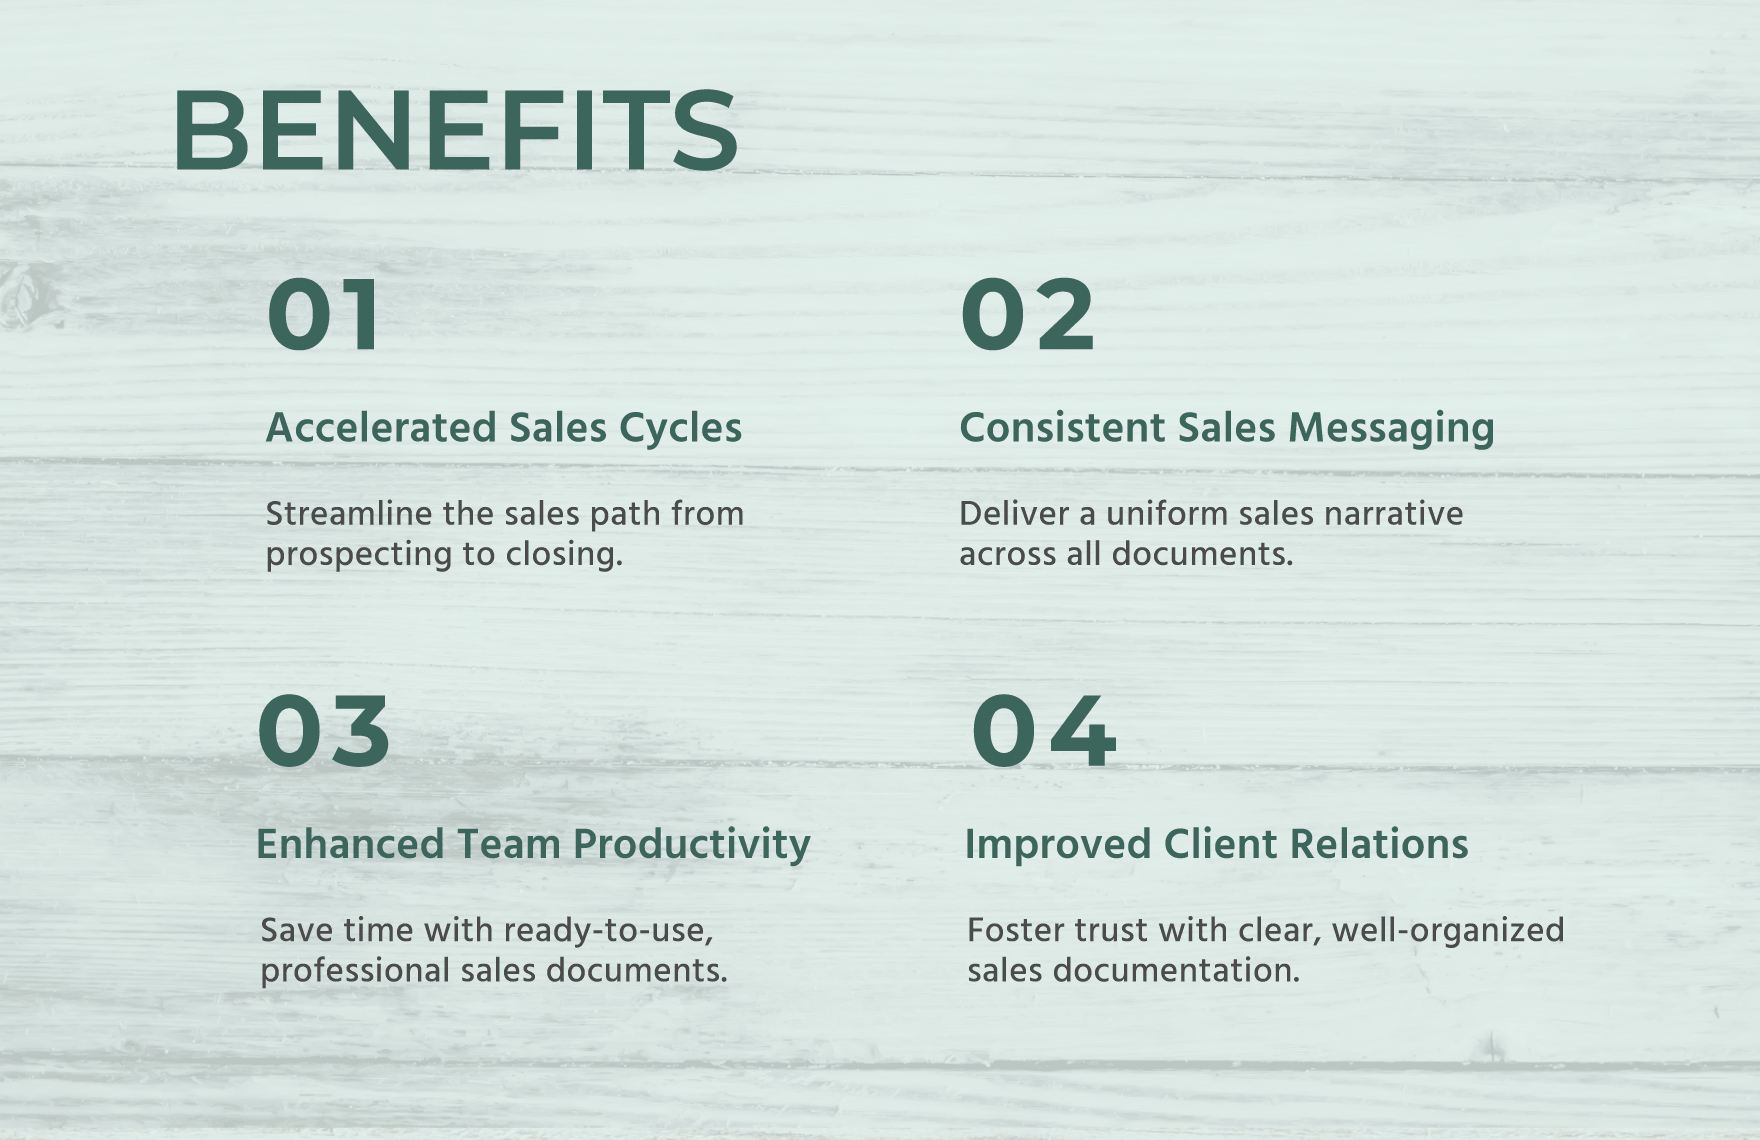 Sales Collateral Design Rubric Template